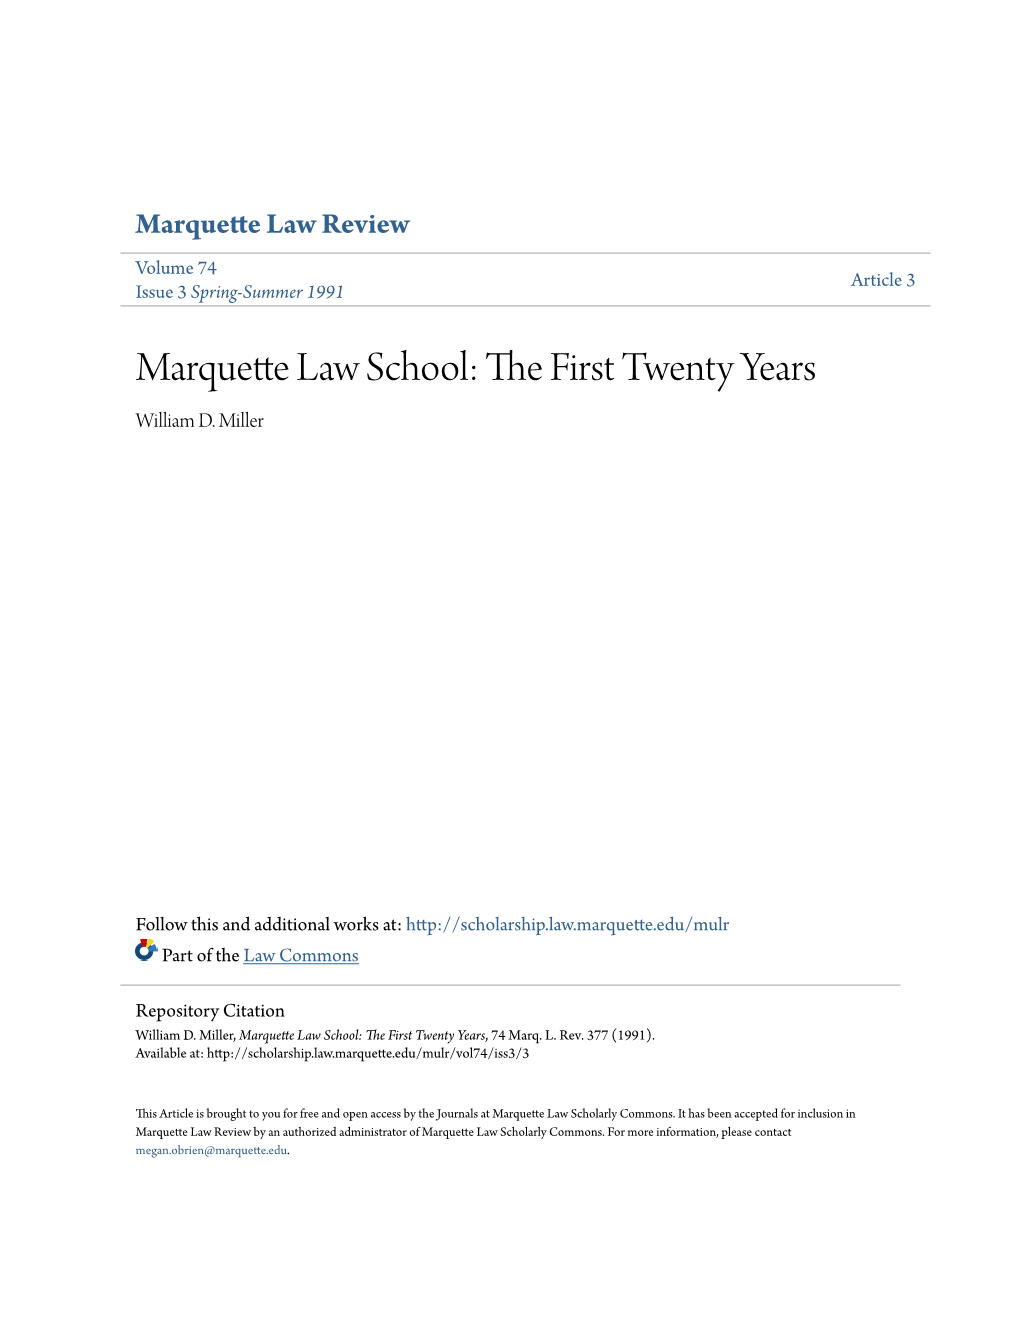 Marquette Law School: the Irsf T Twenty Years William D